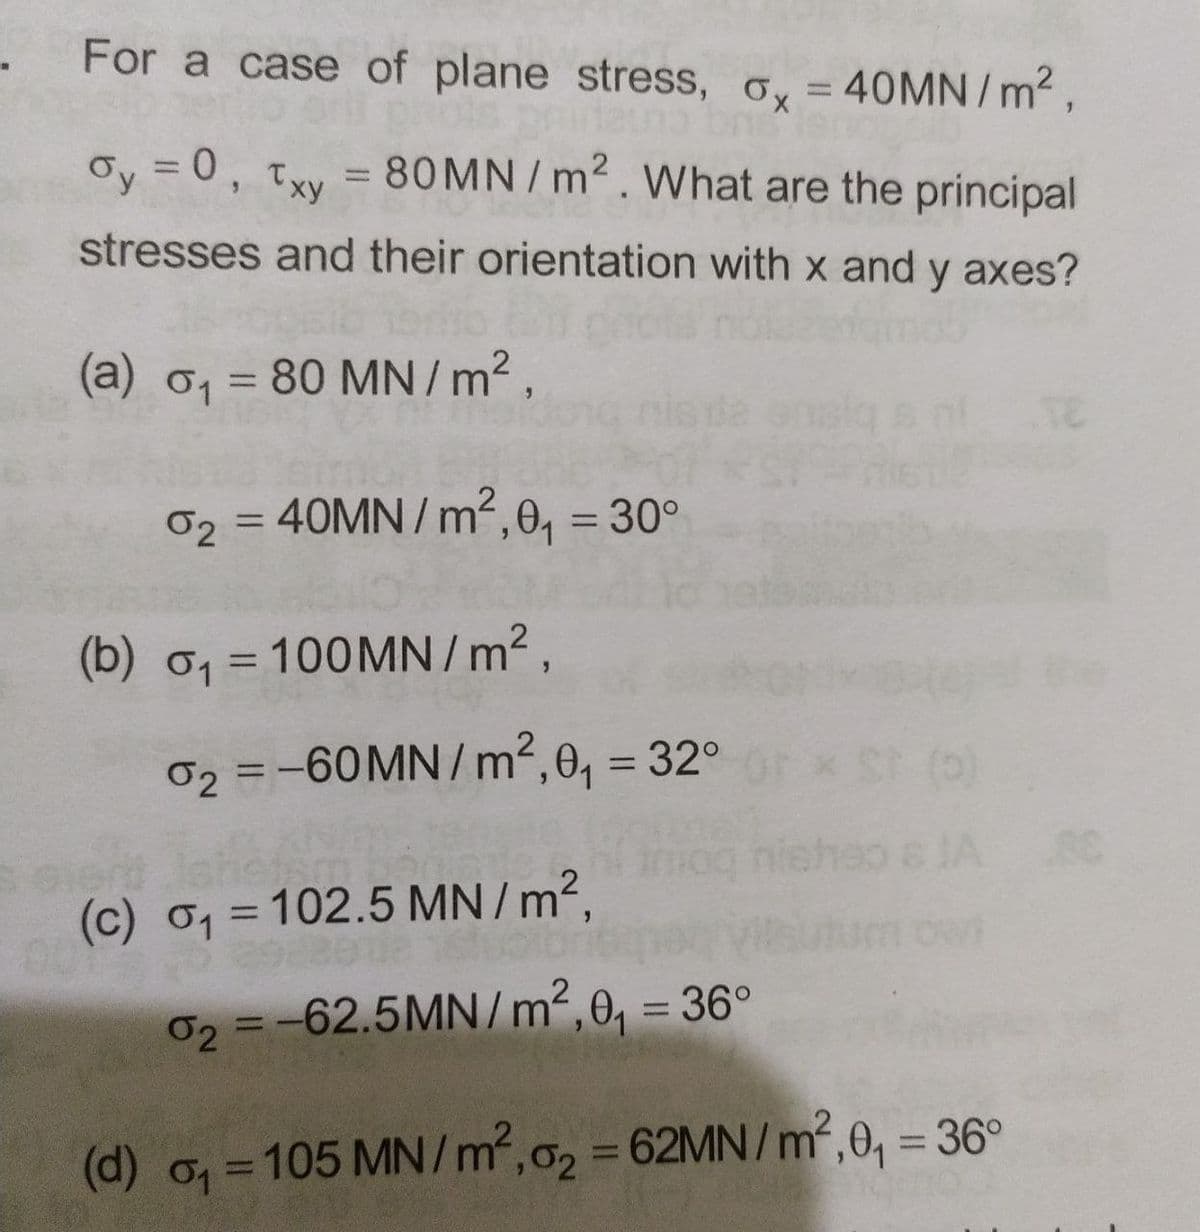 For a case of plane stress, oy = 40MN/m2,
Oy = 0, txy = 80MN/m2. What are the principal
%3D
stresses and their orientation with x and y axes?
(a) 01 = 80 MN / m2 ,
%3D
nis da
02 = 40MN / m²,0, = 30°
%3D
%3D
(b) o1 = 100MN/ m²,
%3D
he
02 =-60MN/ m², 0, = 32°
%3D
6 JA
(c) o1 = 102.5 MN /m²,
02 =-62.5MN/m2, 0, = 36°
%3D
%3D
(d) o=105 MN/m,2 62MN/m²,0, = 36°
